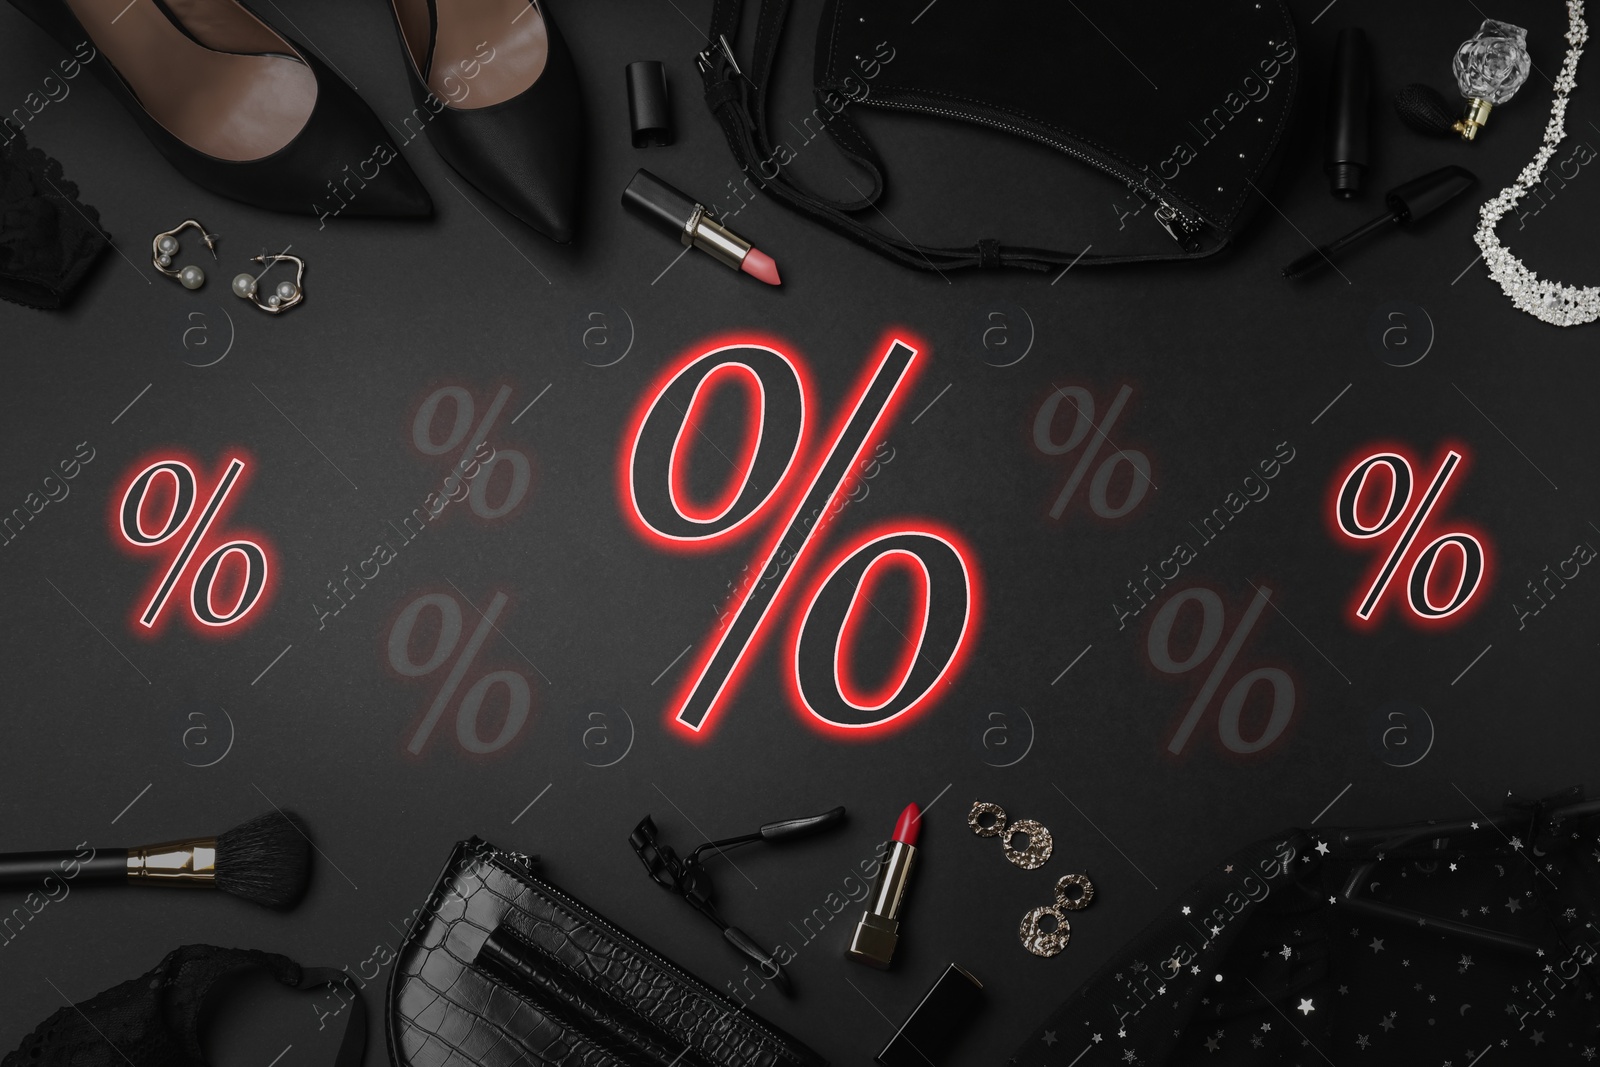 Image of Discount offer. Women's clothes, makeup products, accessories and percent signs on black background, flat lay